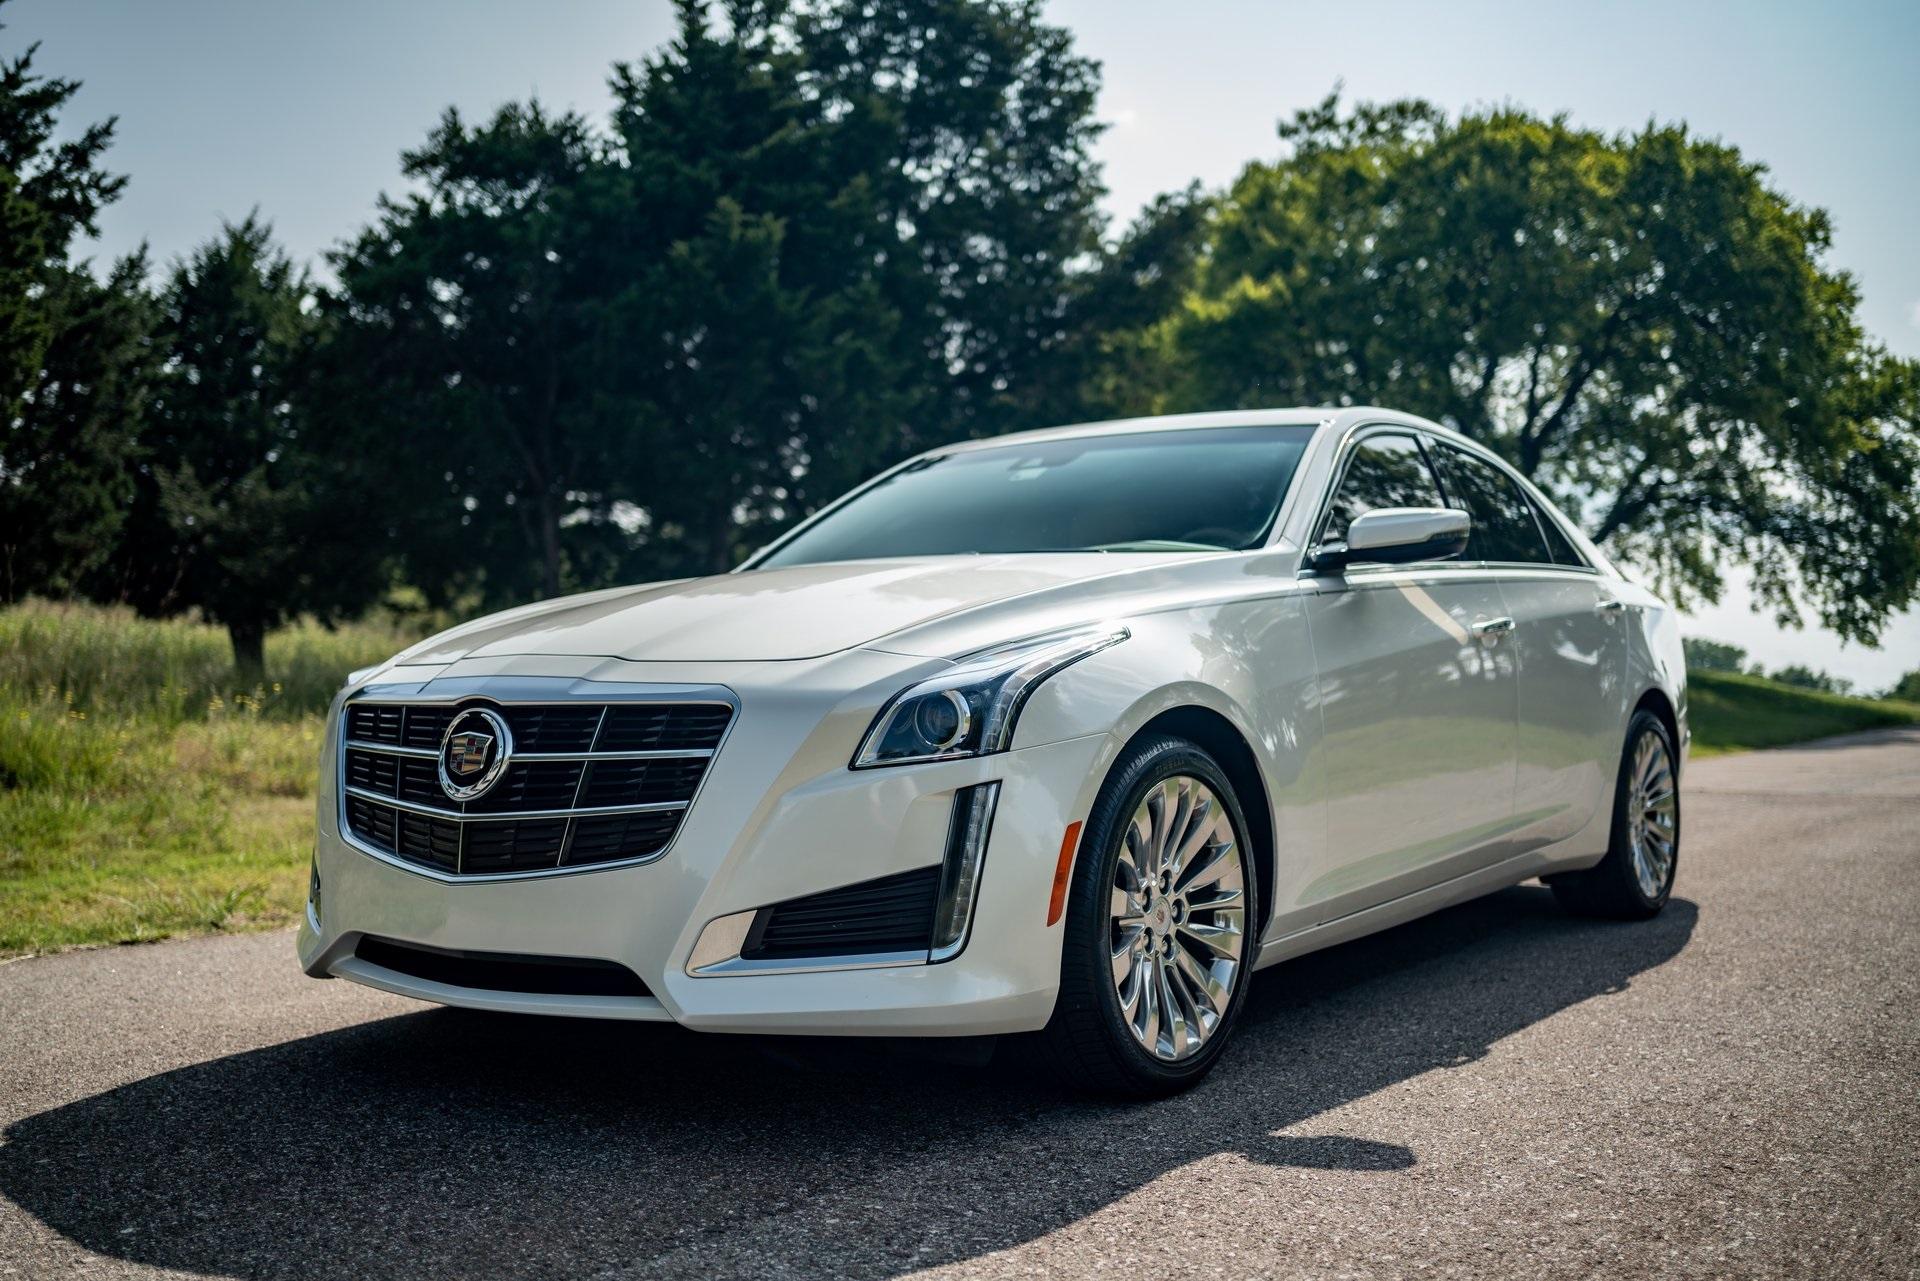 Used 2014 Cadillac CTS 2.0L Turbo Luxury For Sale (Sold)